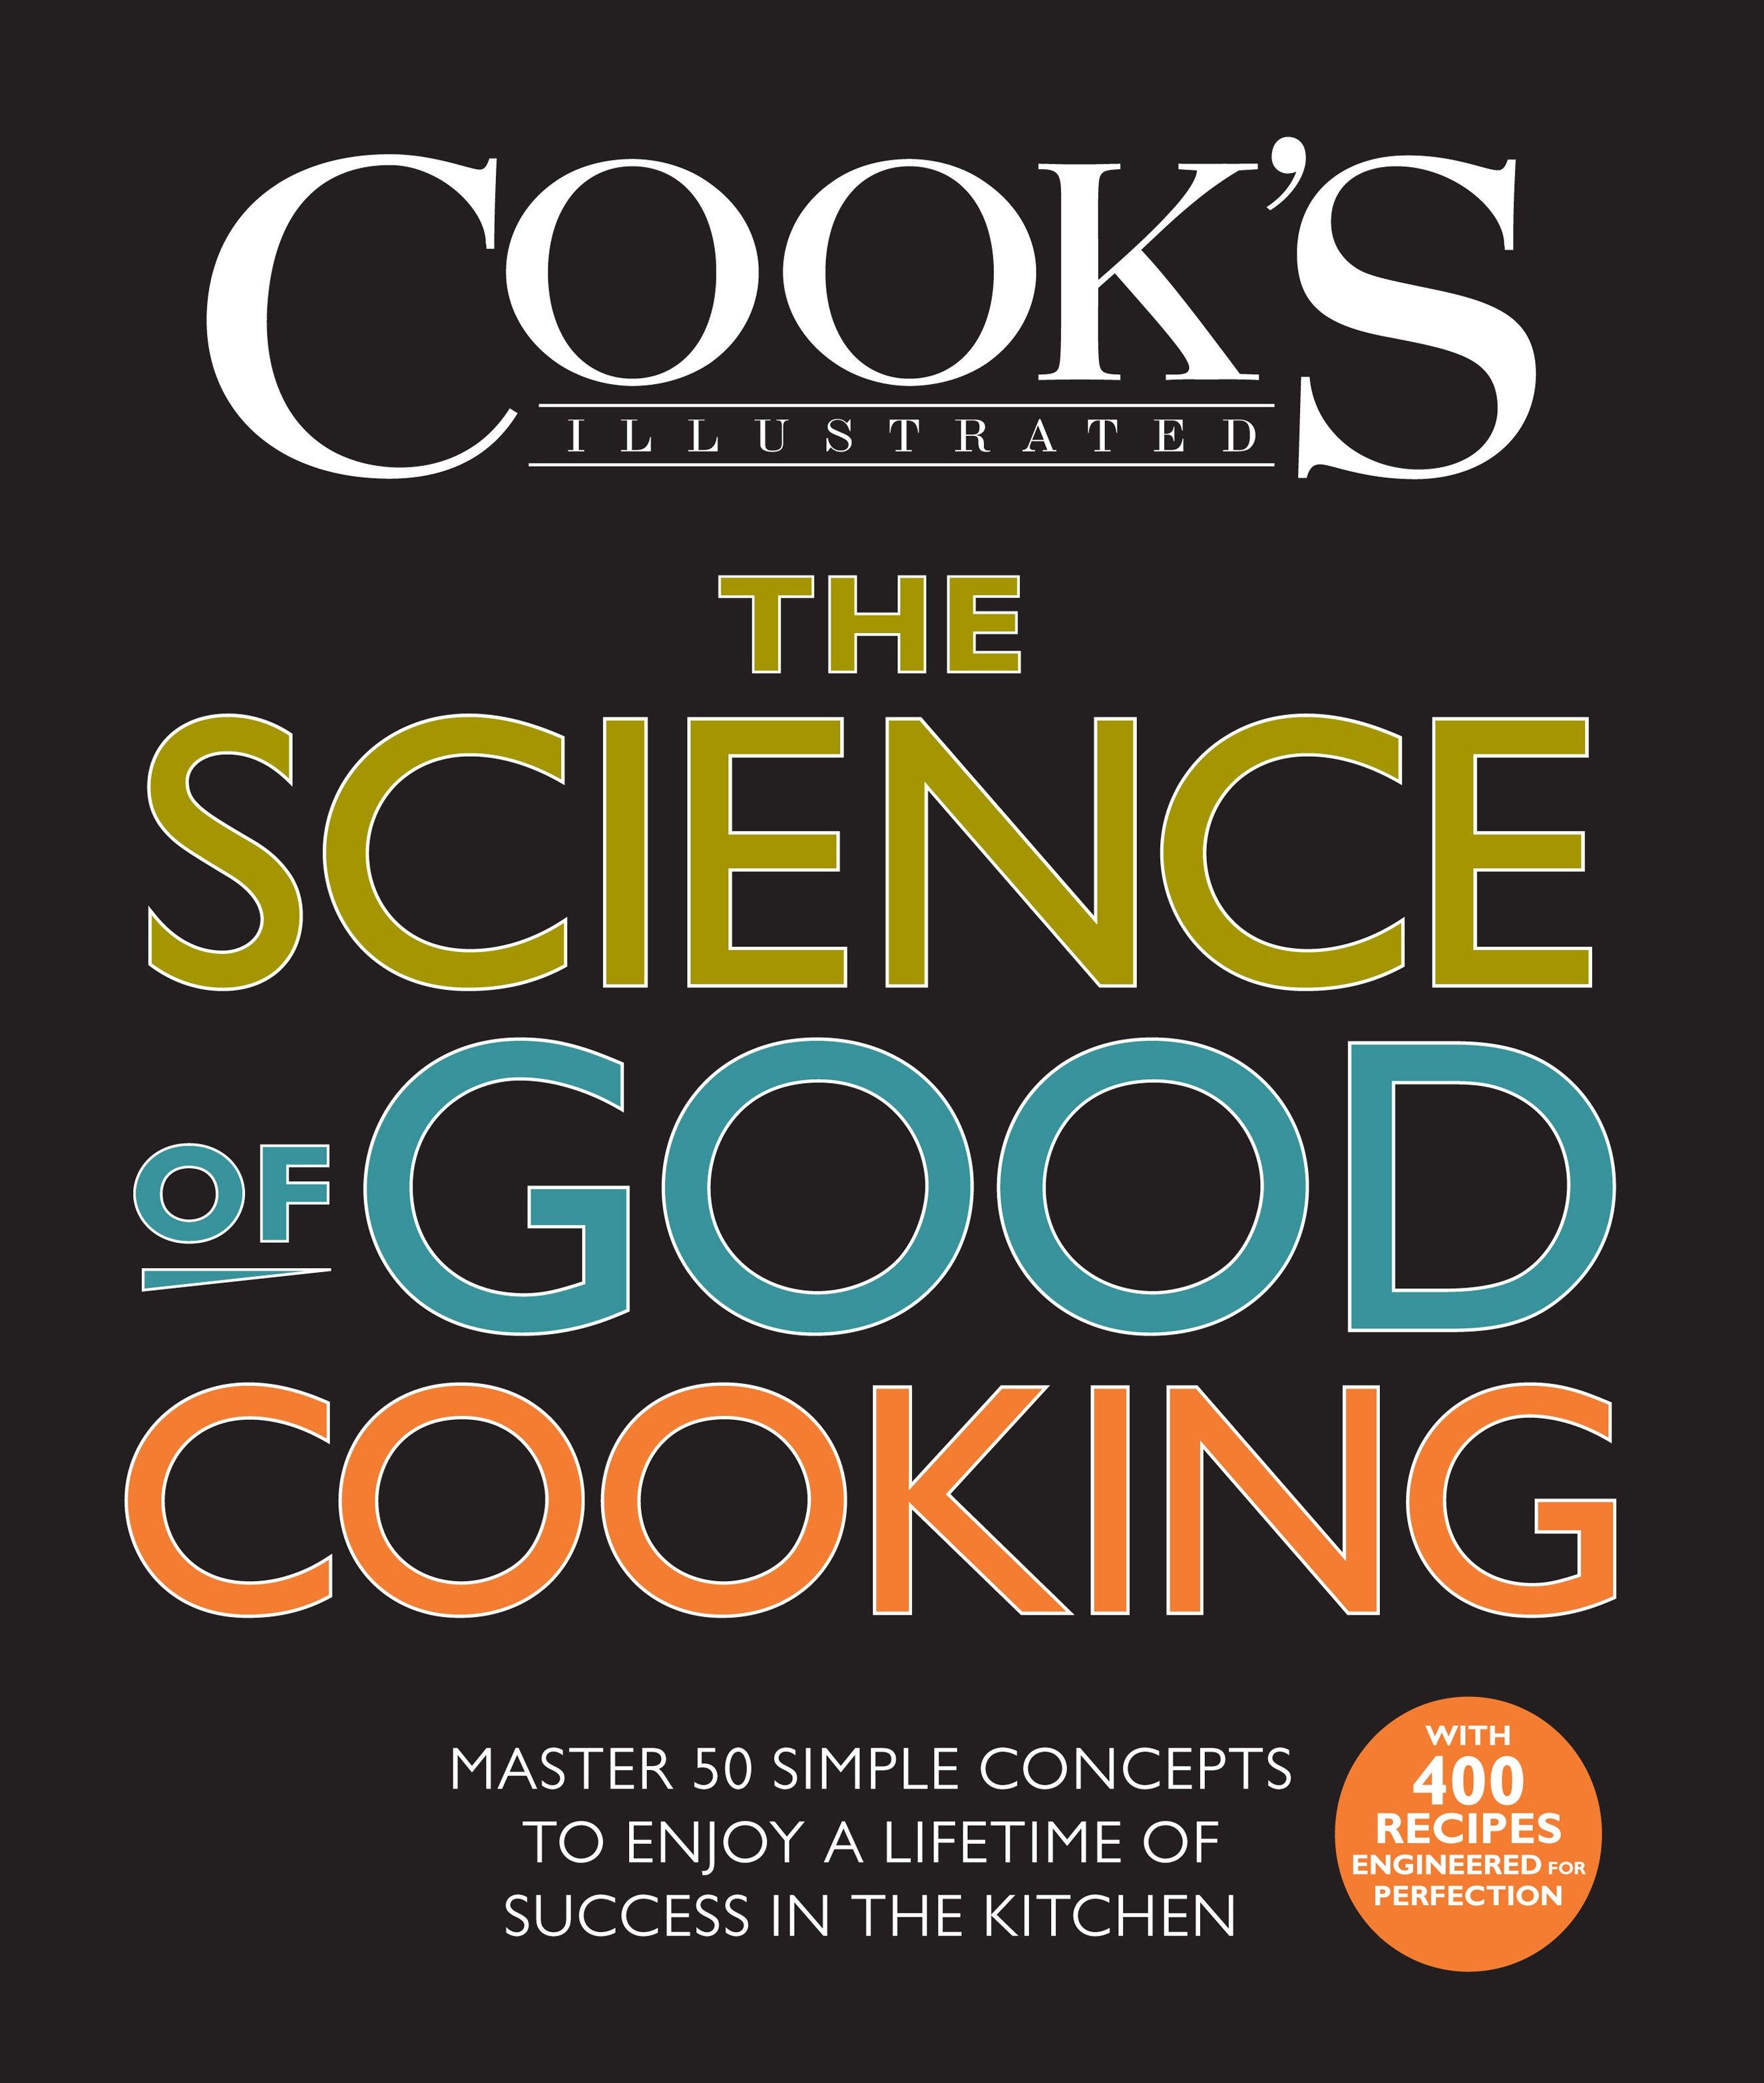 The science of good cooking master 50 simple concepts to enjoy a lifetime of success in the kitchen cover image